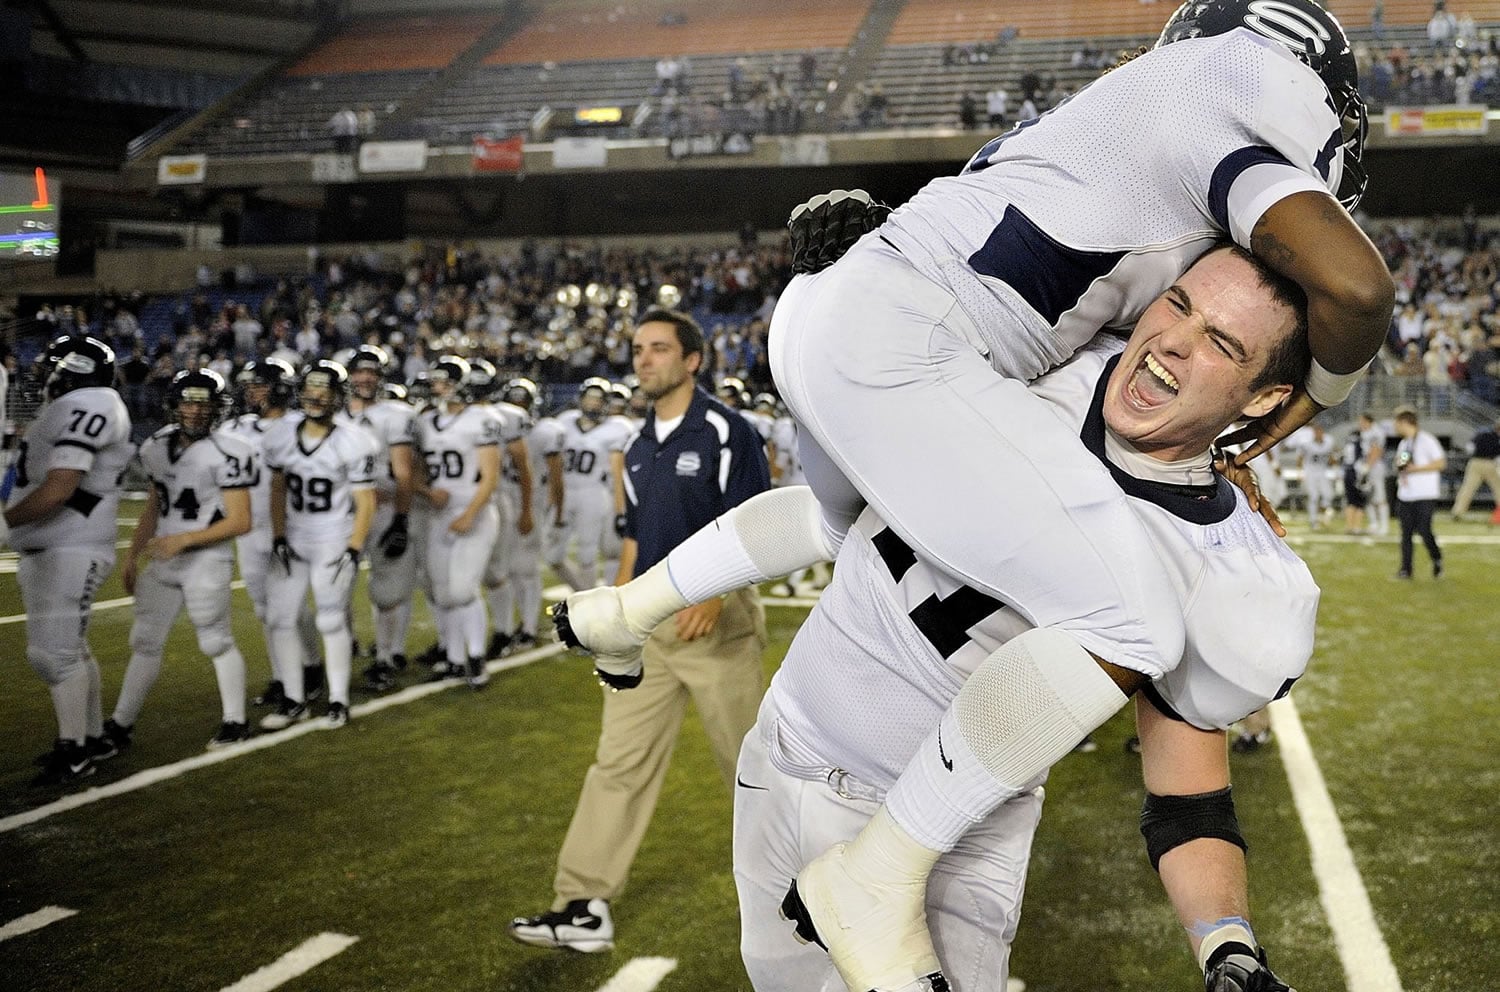 Skyview's Riley Bockmier, giving a lift to C.J.